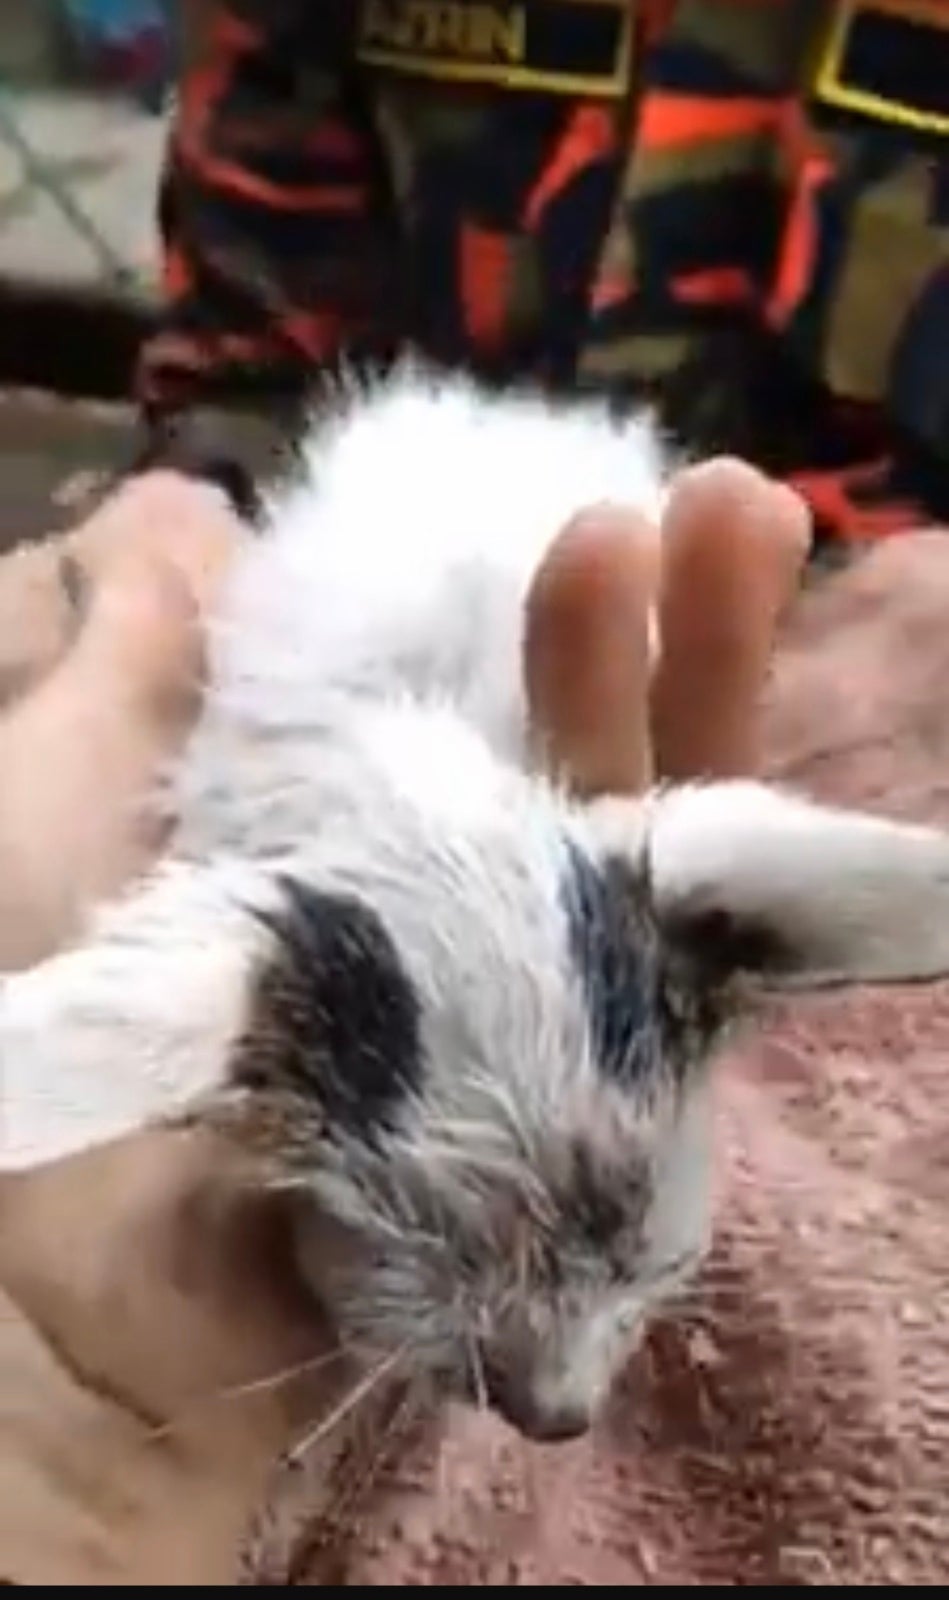 Kedah Firefighter Goes Viral After Resurrecting Drowning Kitten Back To Life in Disastrous Lekima Thunderstorm - WORLD OF BUZZ